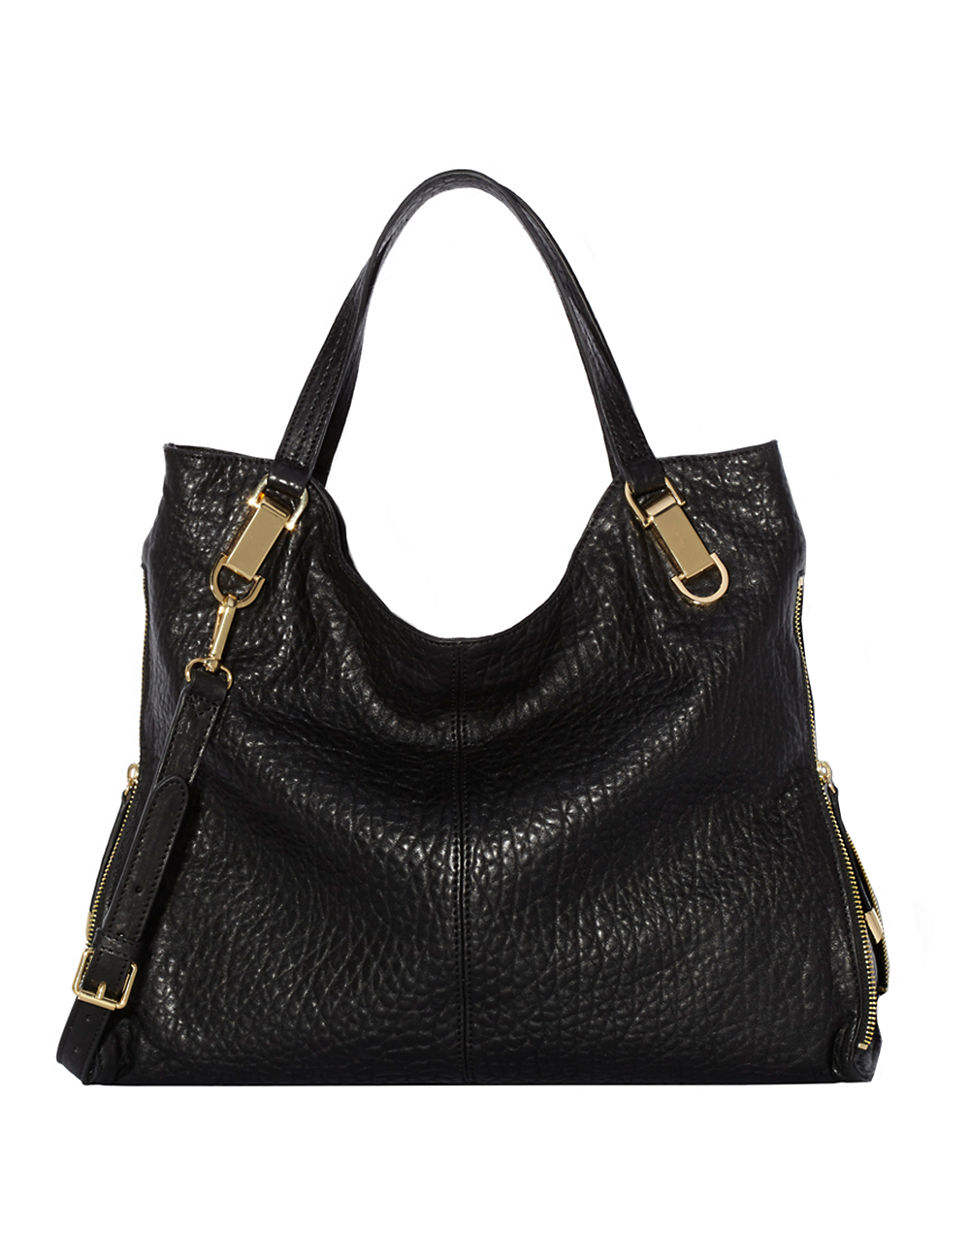 Lyst - Vince Camuto Riley Leather Tote Bag in Black